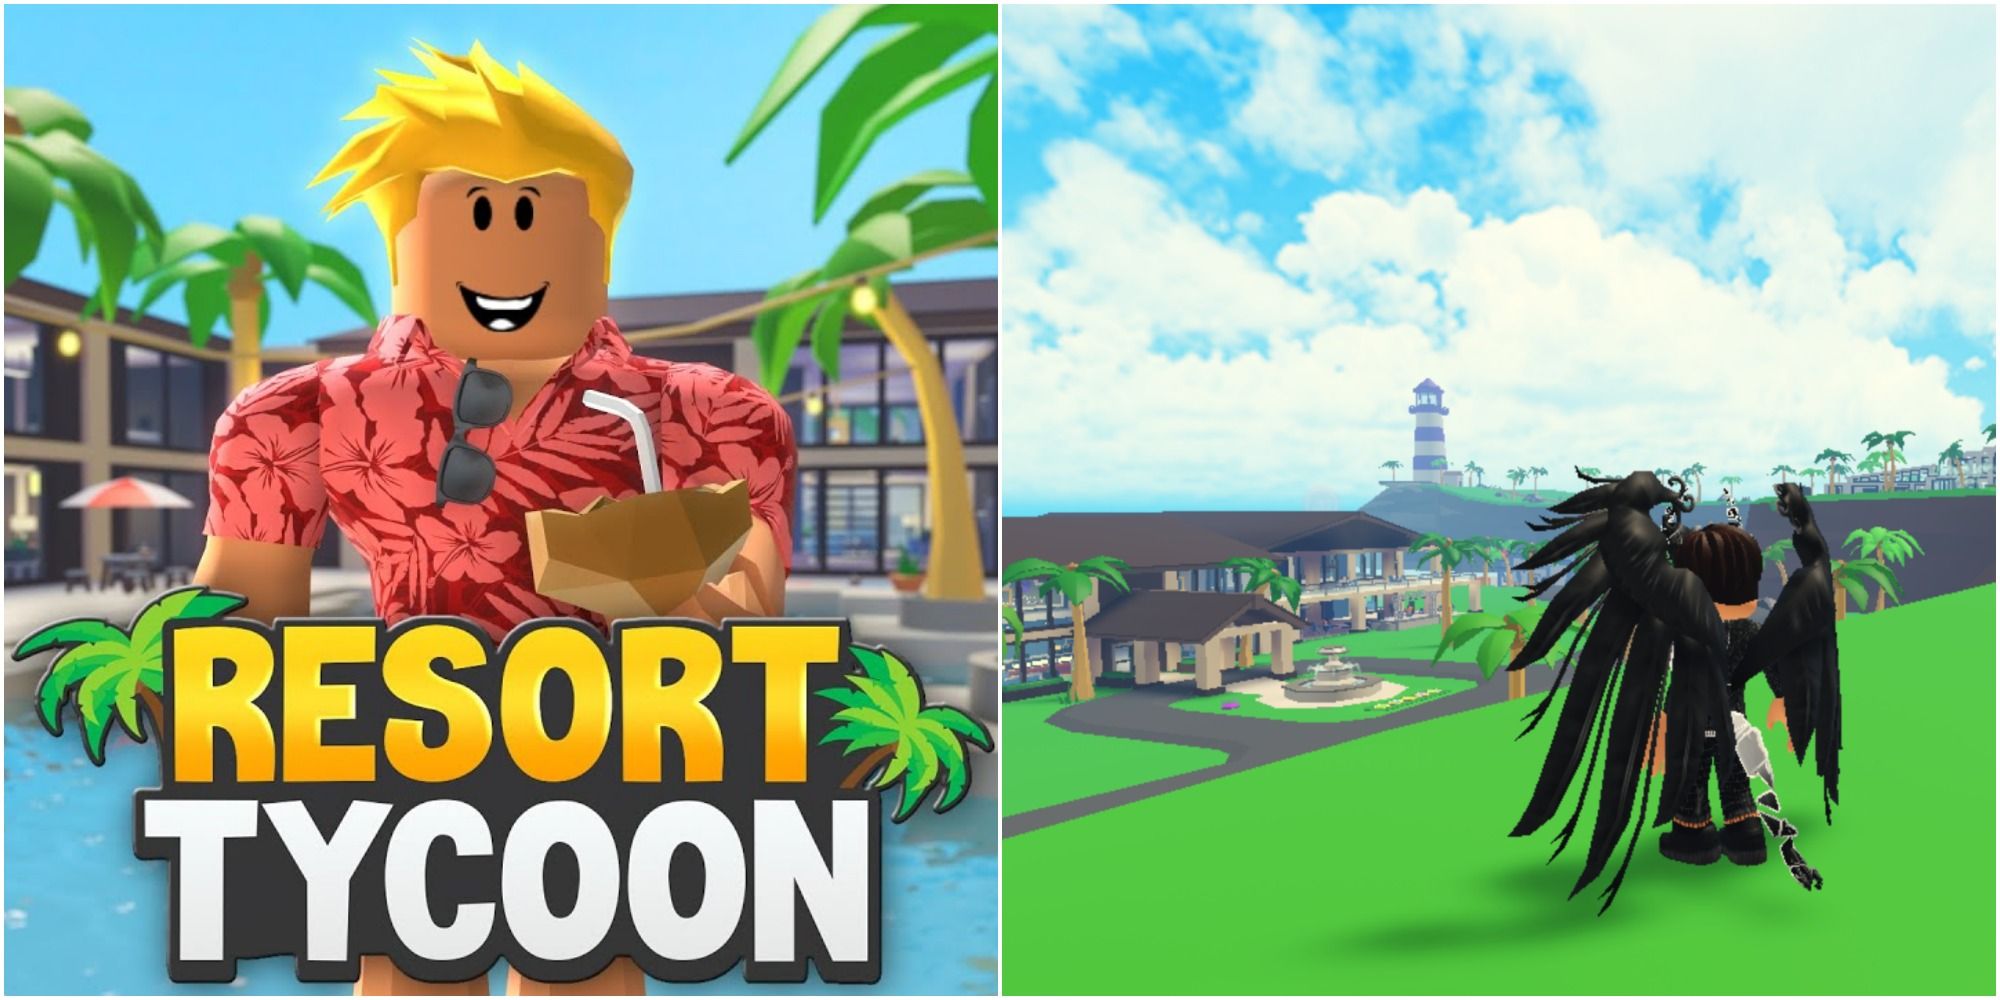 Split image  thumbnail for Tropical Resort Tycoon on the left, with a player overlooking their resort on the right.